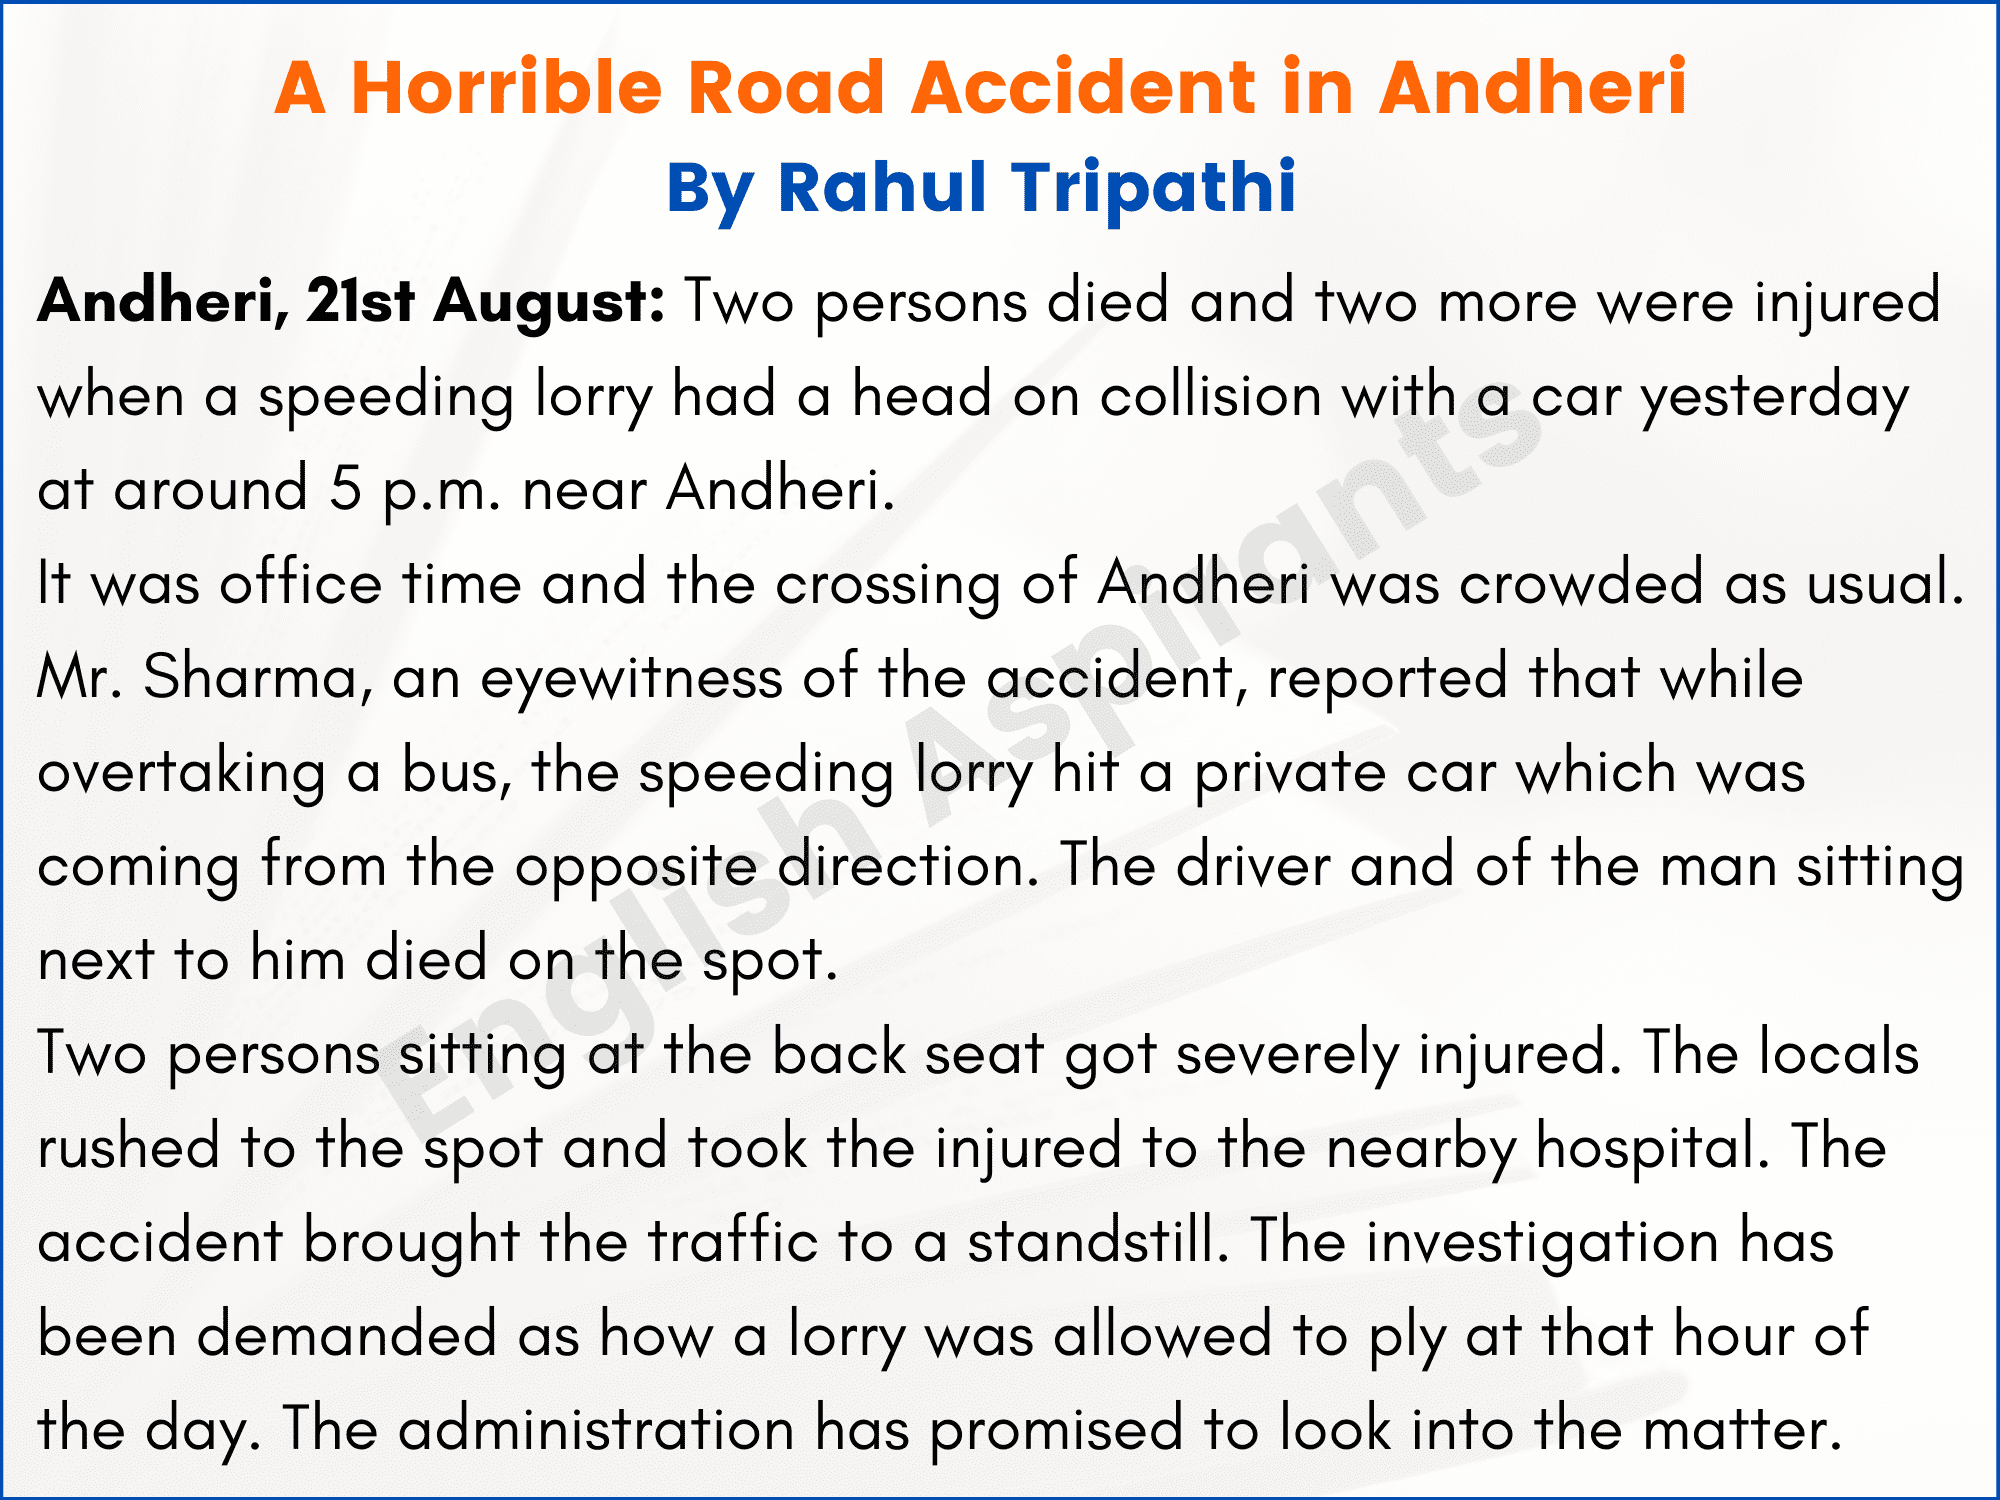 Report Writing on Road Accident